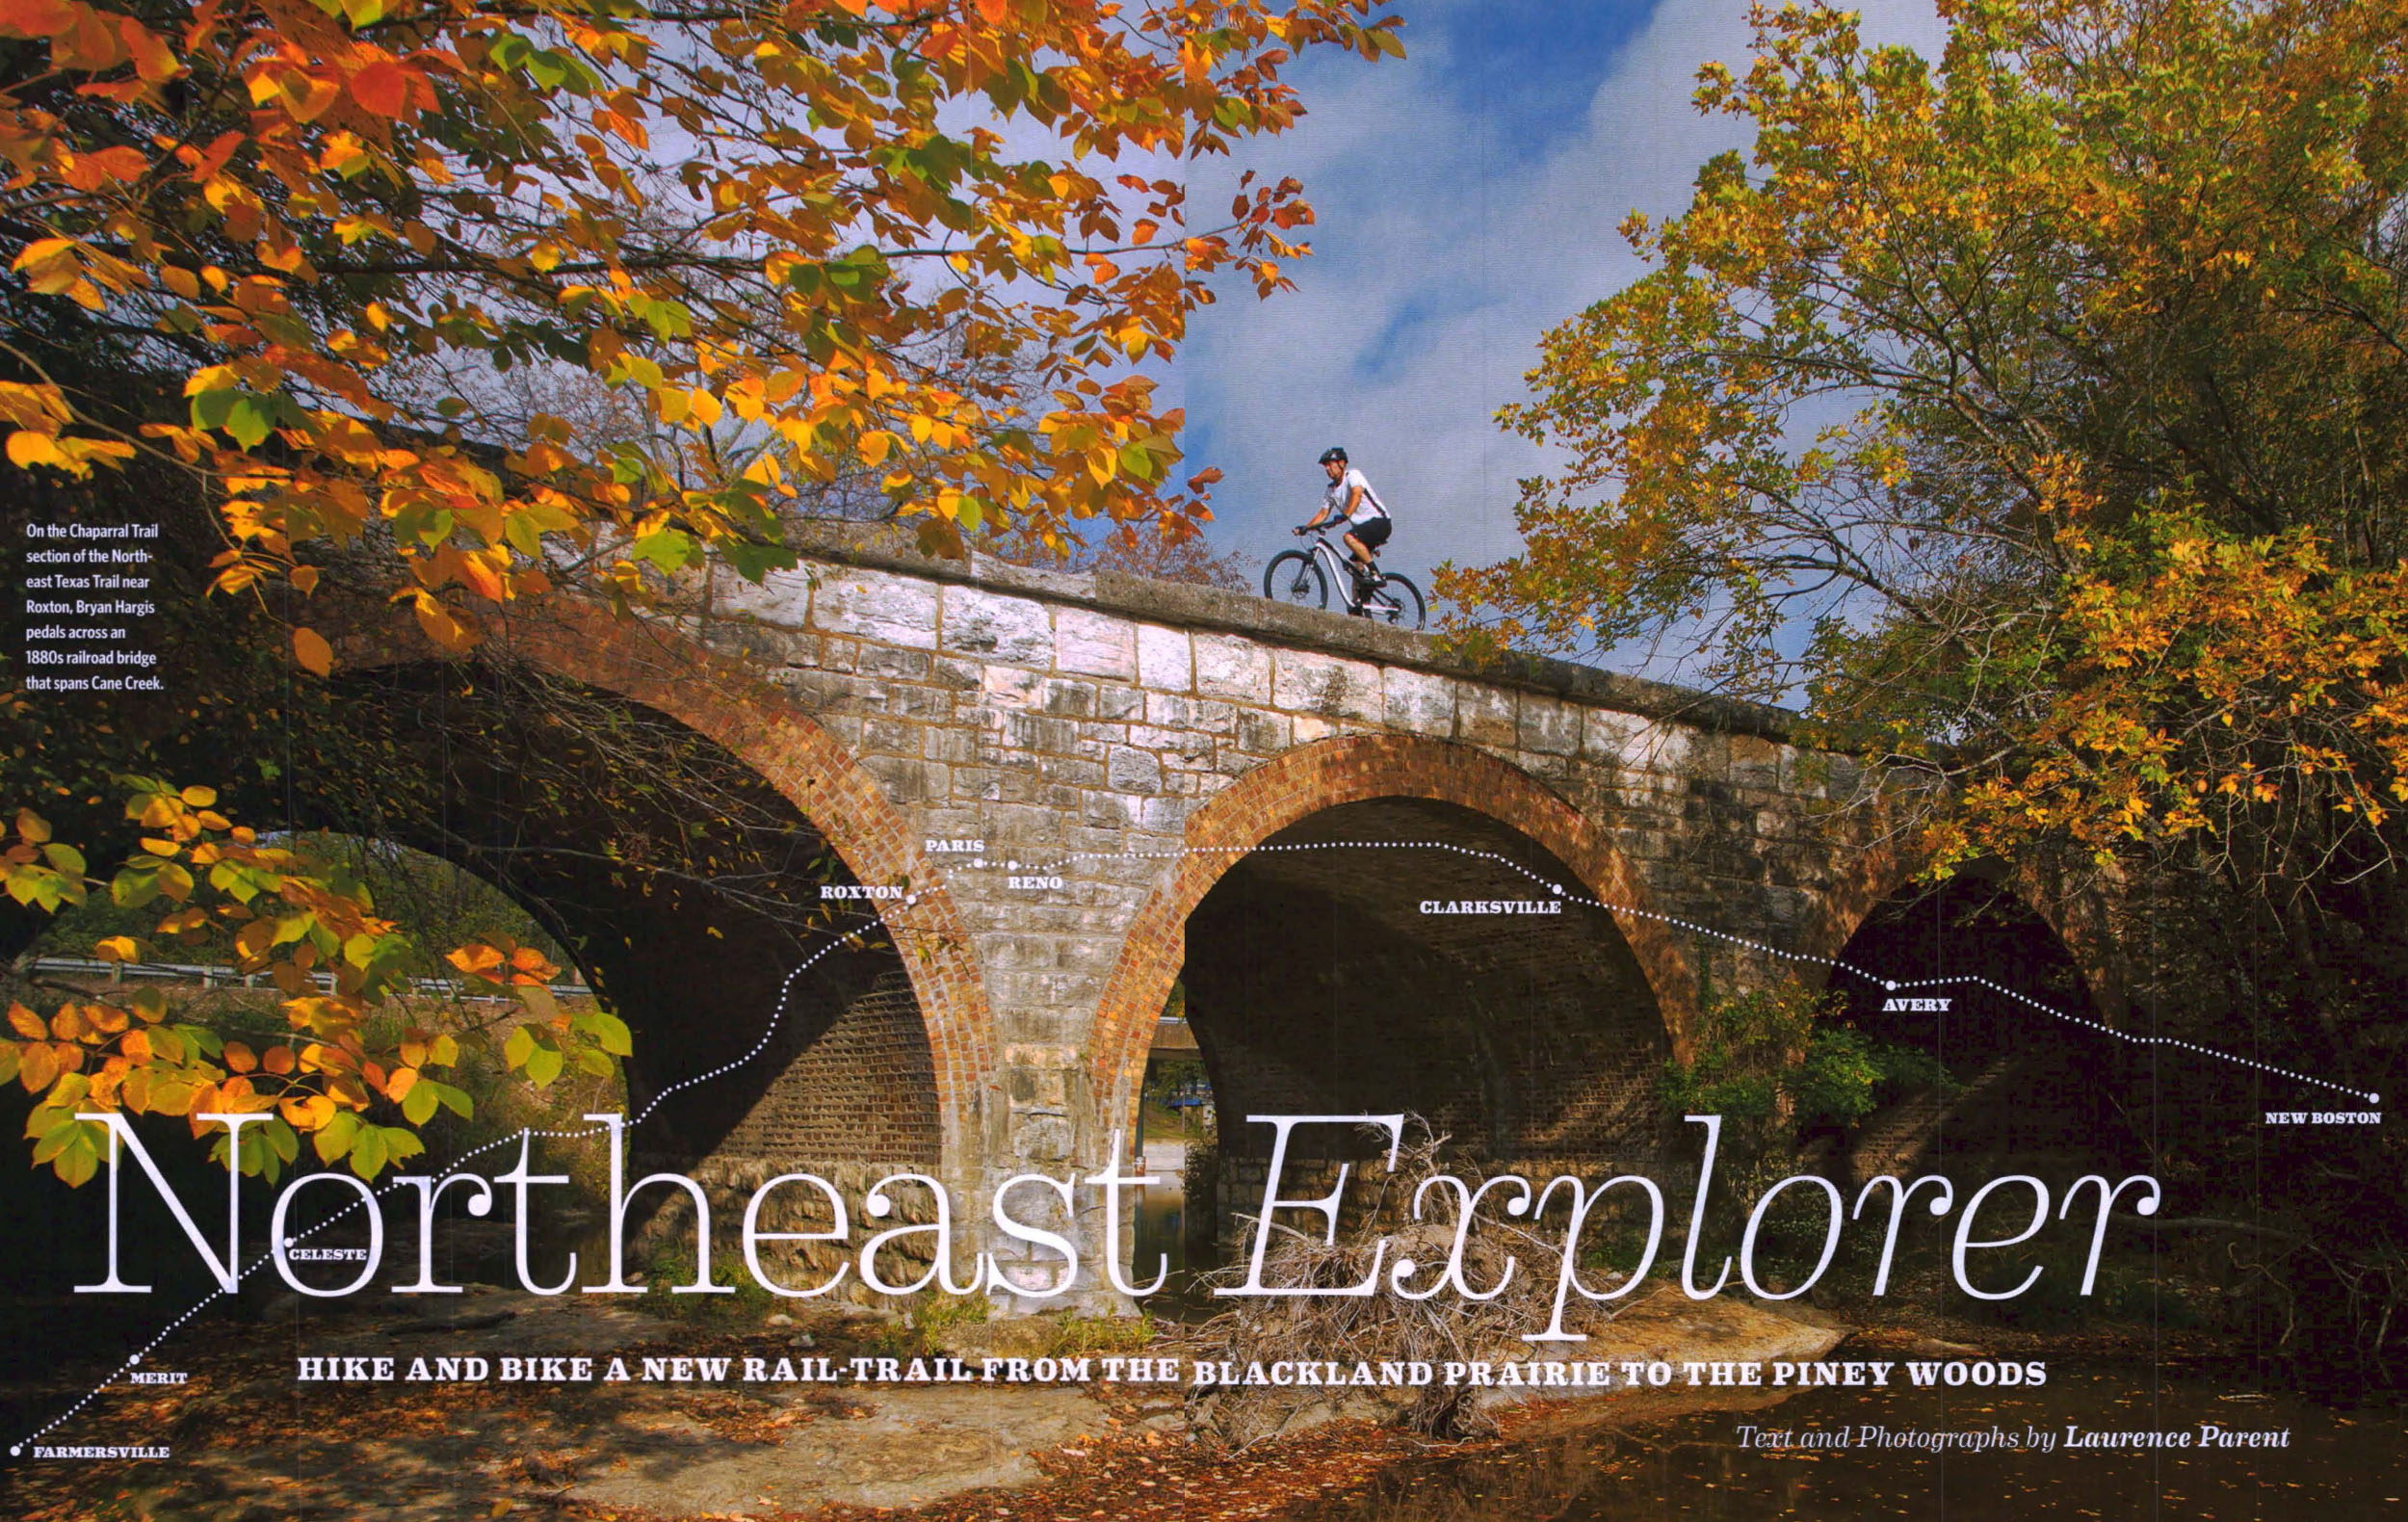 A person rides a bike over a stone bridge surrounded by fall colors